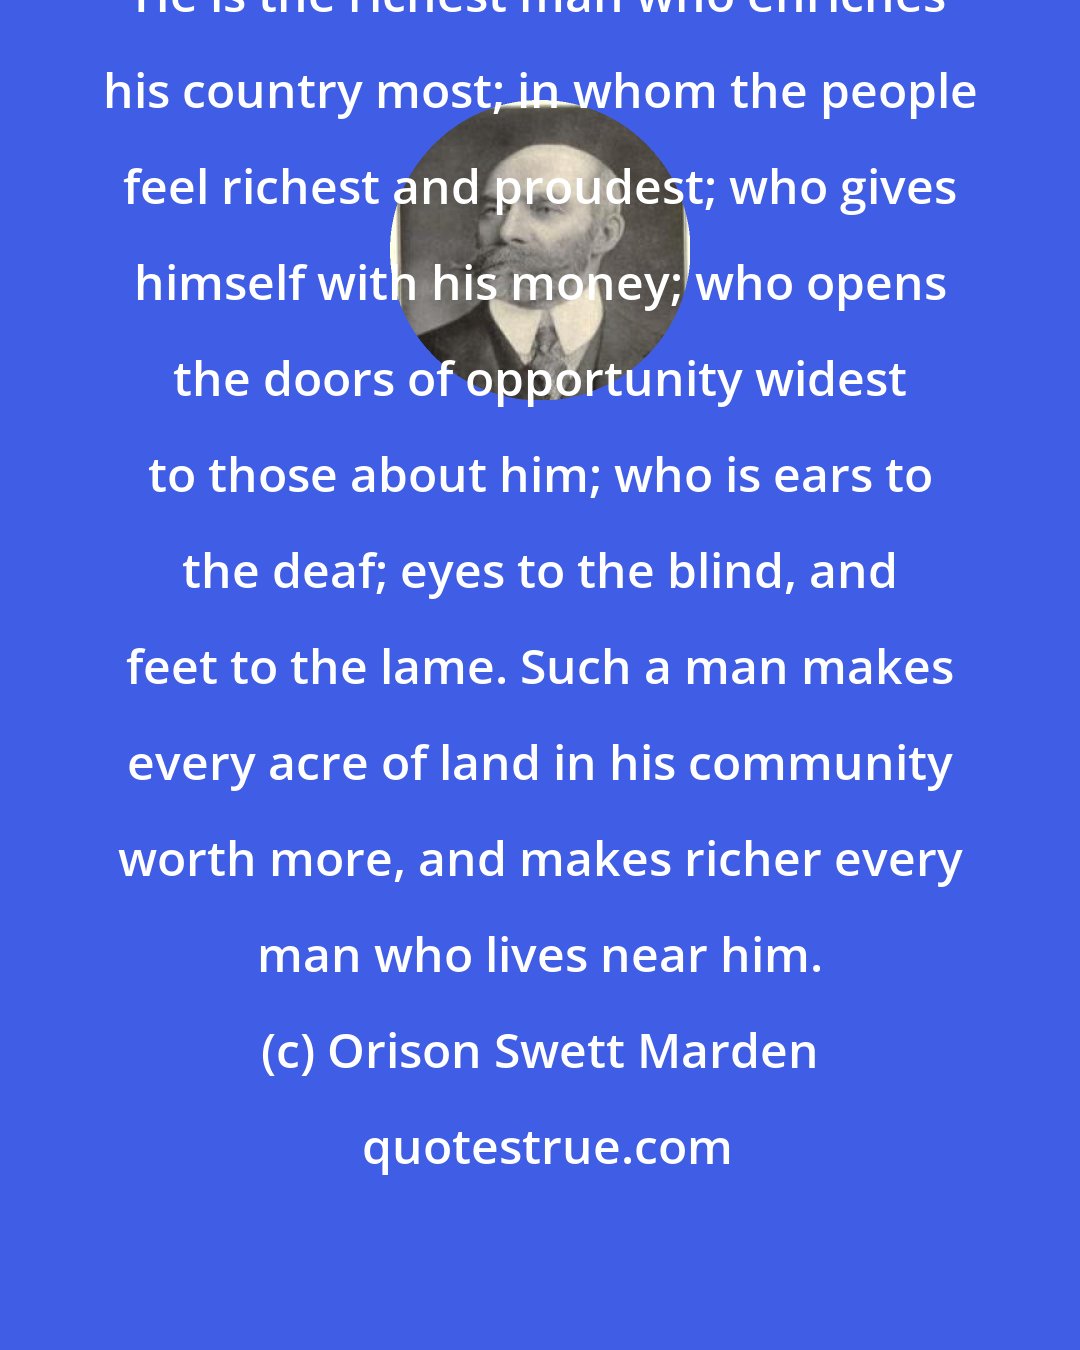 Orison Swett Marden: He is the richest man who enriches his country most; in whom the people feel richest and proudest; who gives himself with his money; who opens the doors of opportunity widest to those about him; who is ears to the deaf; eyes to the blind, and feet to the lame. Such a man makes every acre of land in his community worth more, and makes richer every man who lives near him.